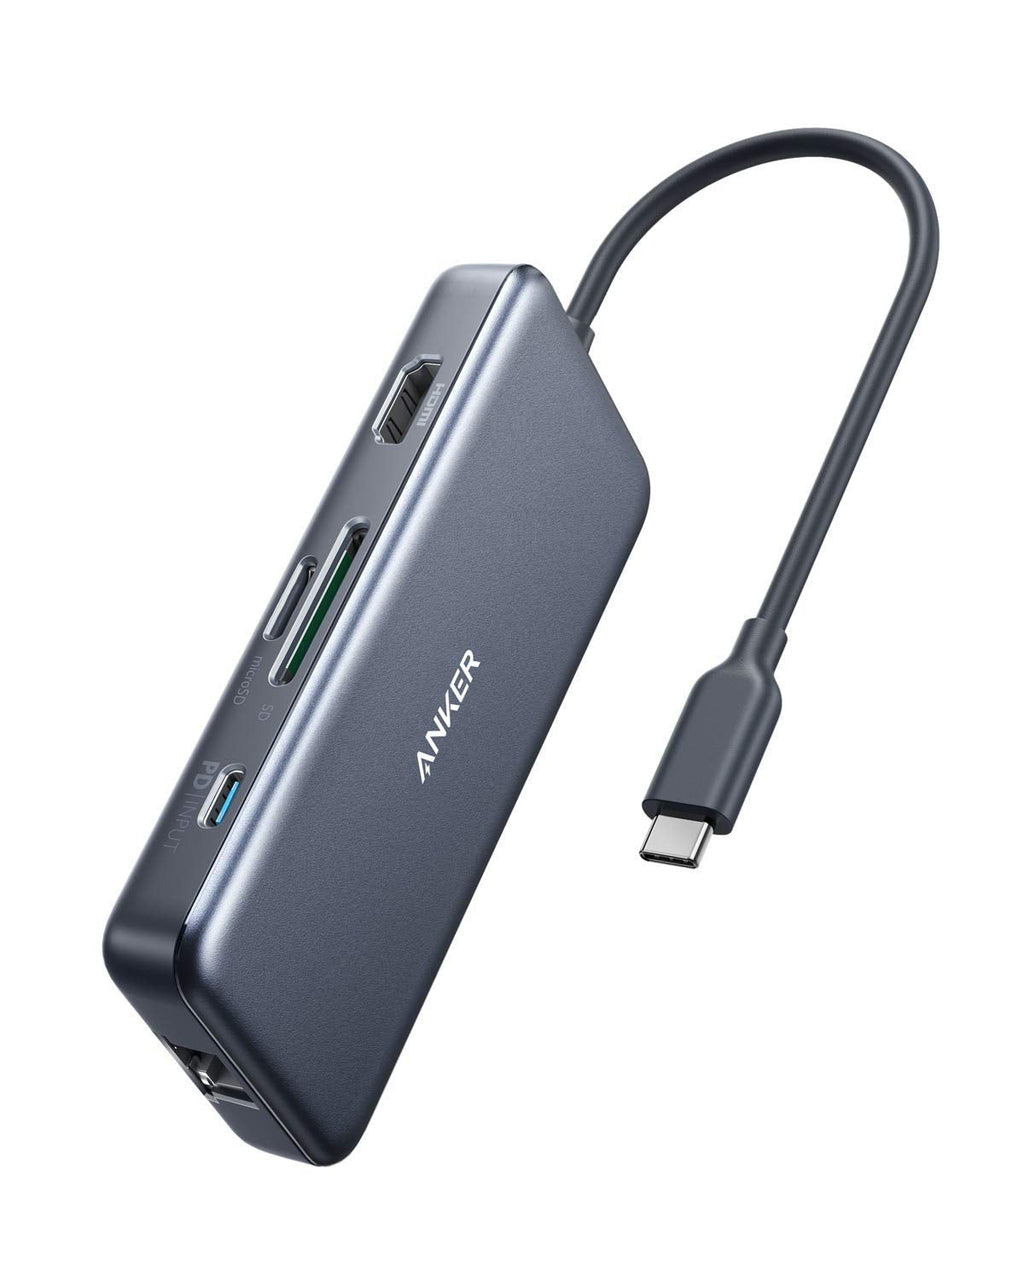 [Australia - AusPower] - Anker USB C Hub Adapter, PowerExpand+ 7-in-1 USB C Hub, with 4K USB C to HDMI, 60W Power Delivery, 1Gbps Ethernet, 2 USB 3.0 Ports, SD and microSD Card Readers, for MacBook Pro and Other USB C Laptops 